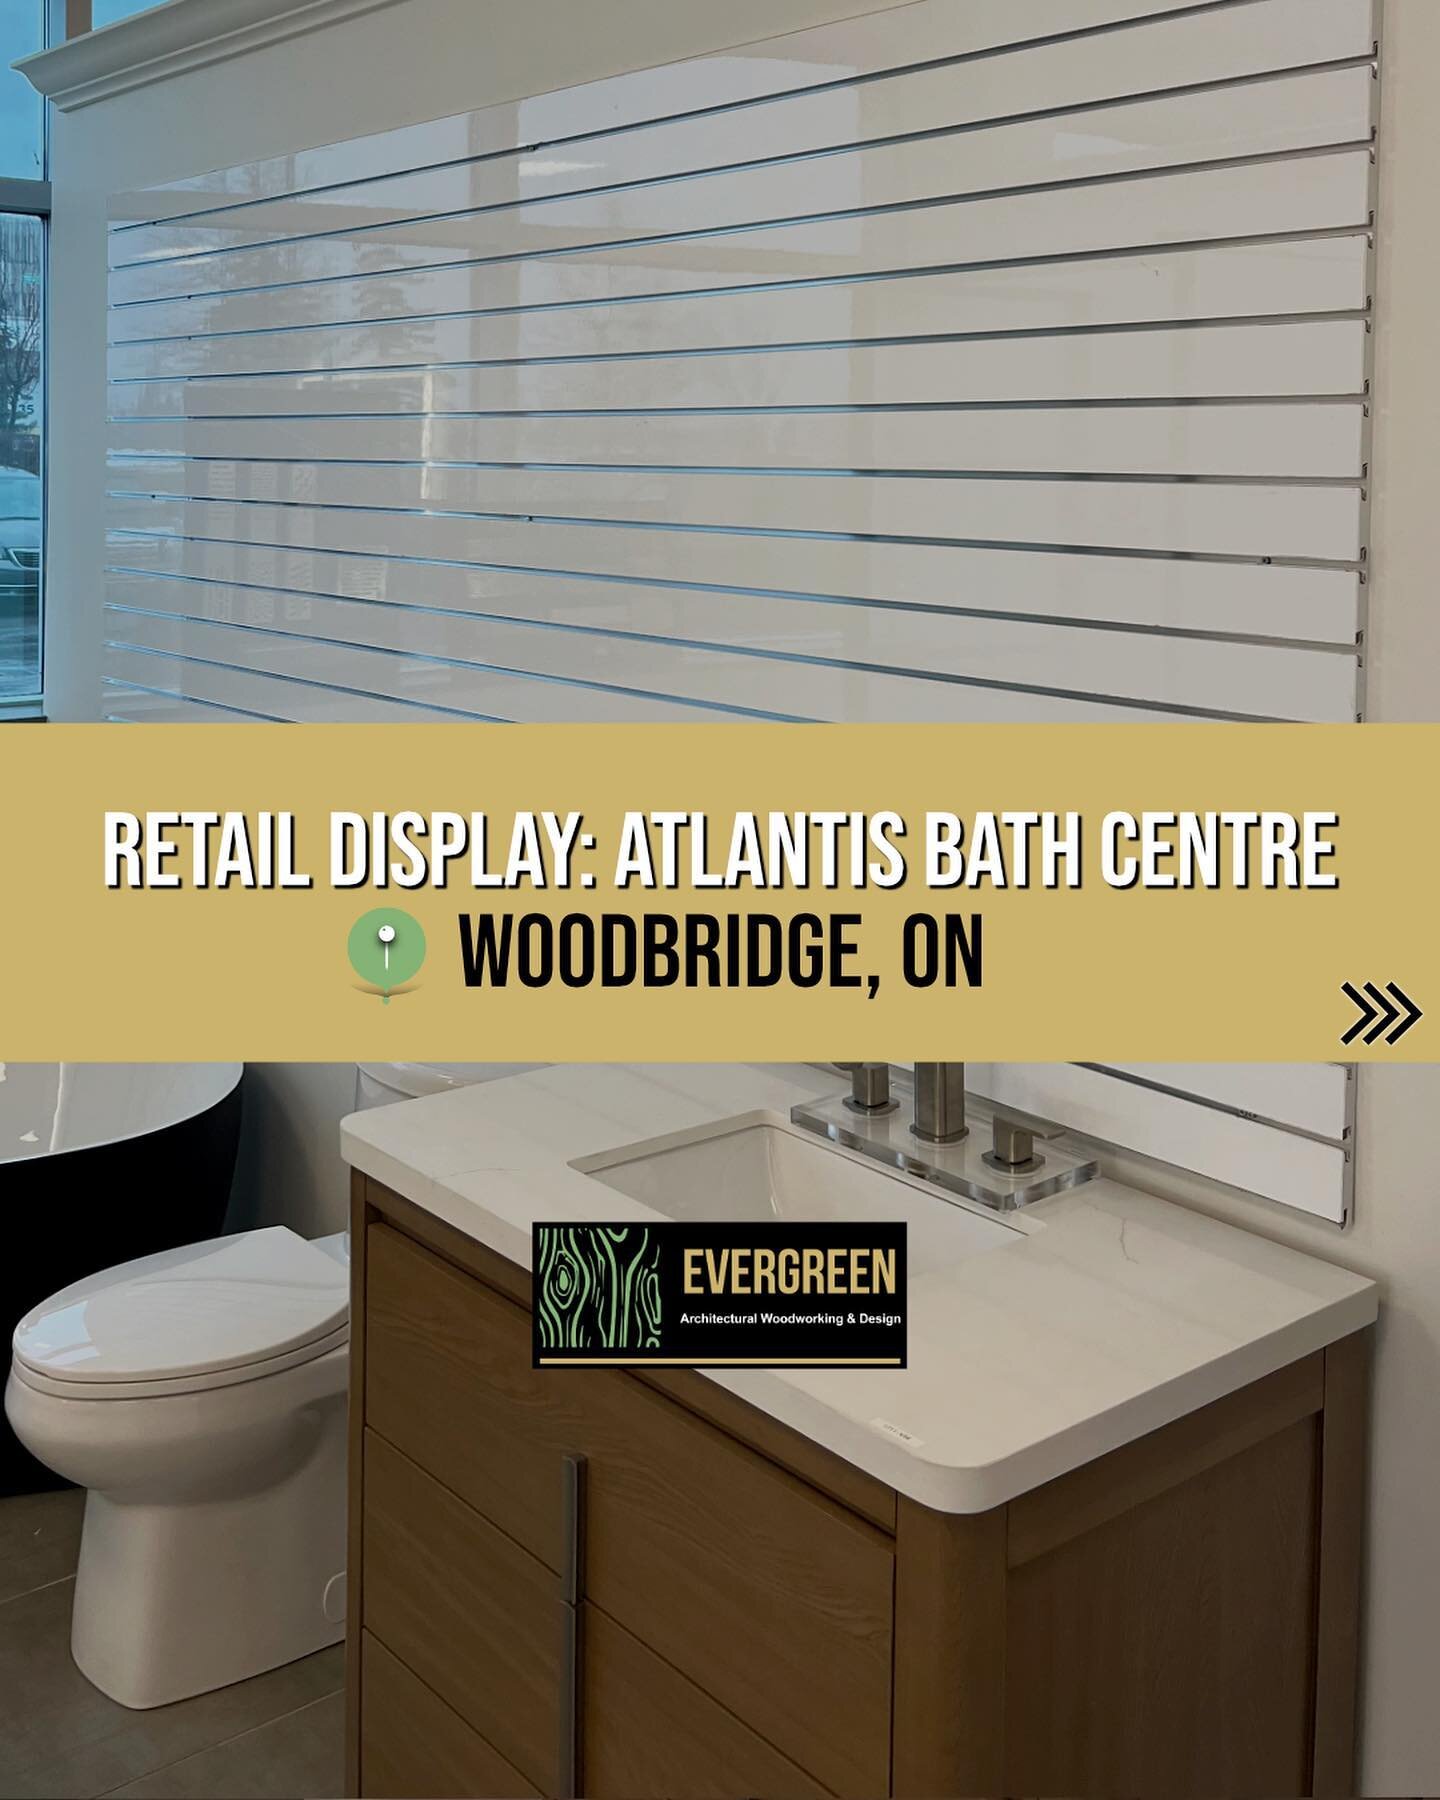 This retail display unit was designed with a white high gloss slot wall that works perfectly for any showroom 🤩

To bring durability to this design, the slot wall uses aluminum inserts that provides the client with customization of their showroom 💯